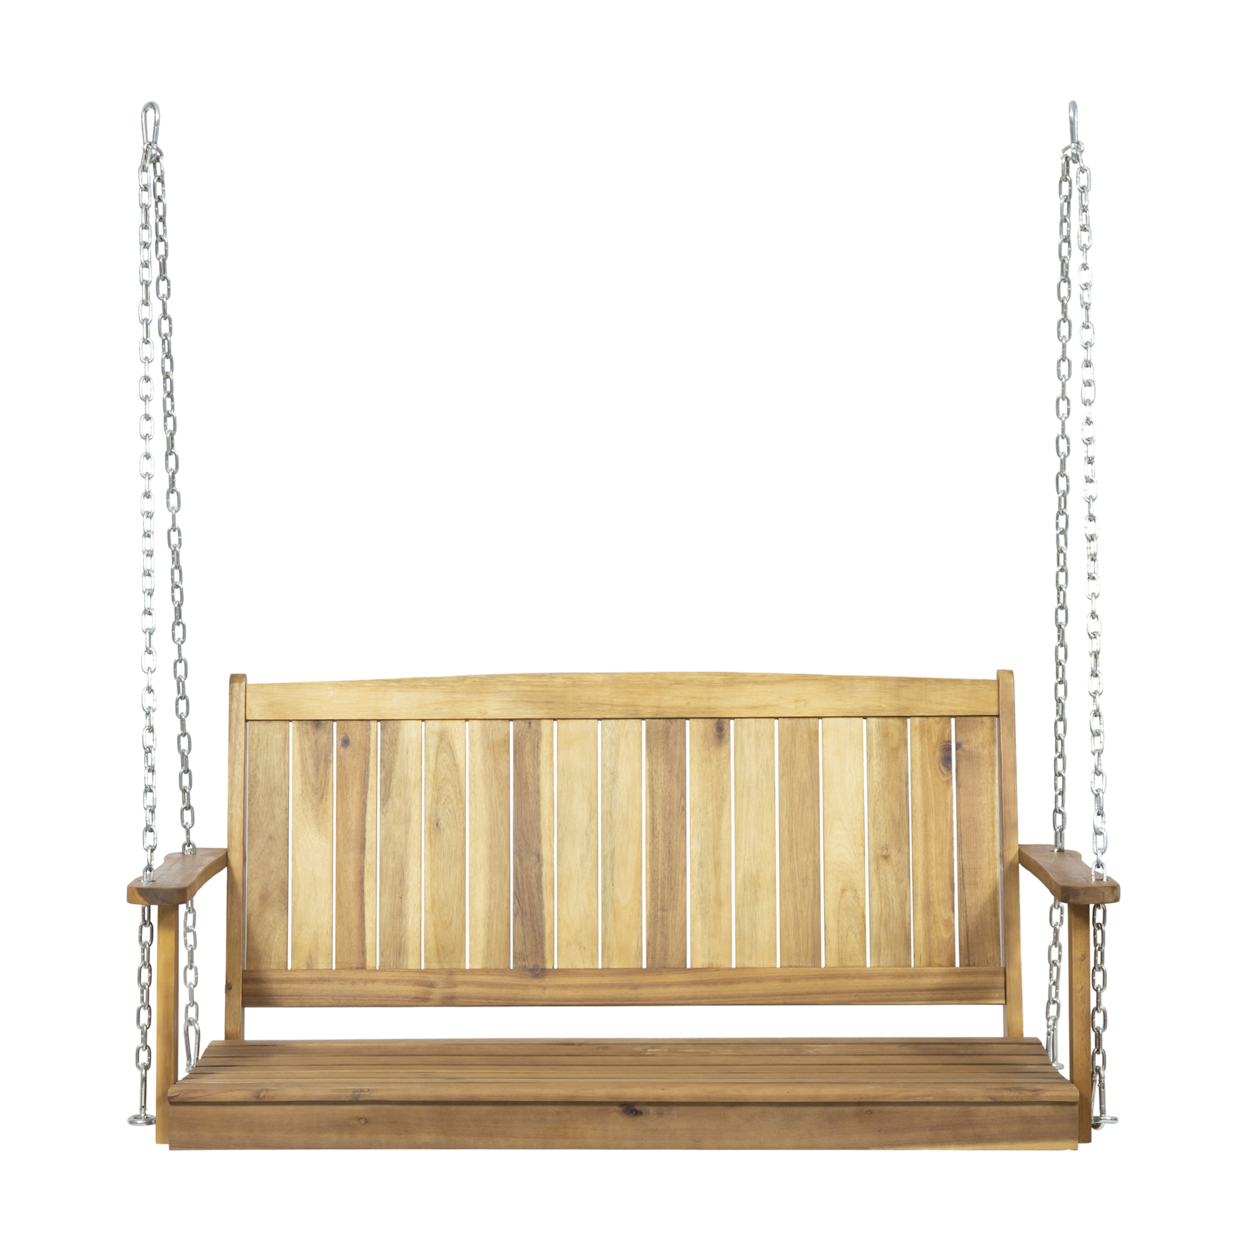 Lilith Outdoor Aacia Wood Porch Swing - Dark Gray Finish